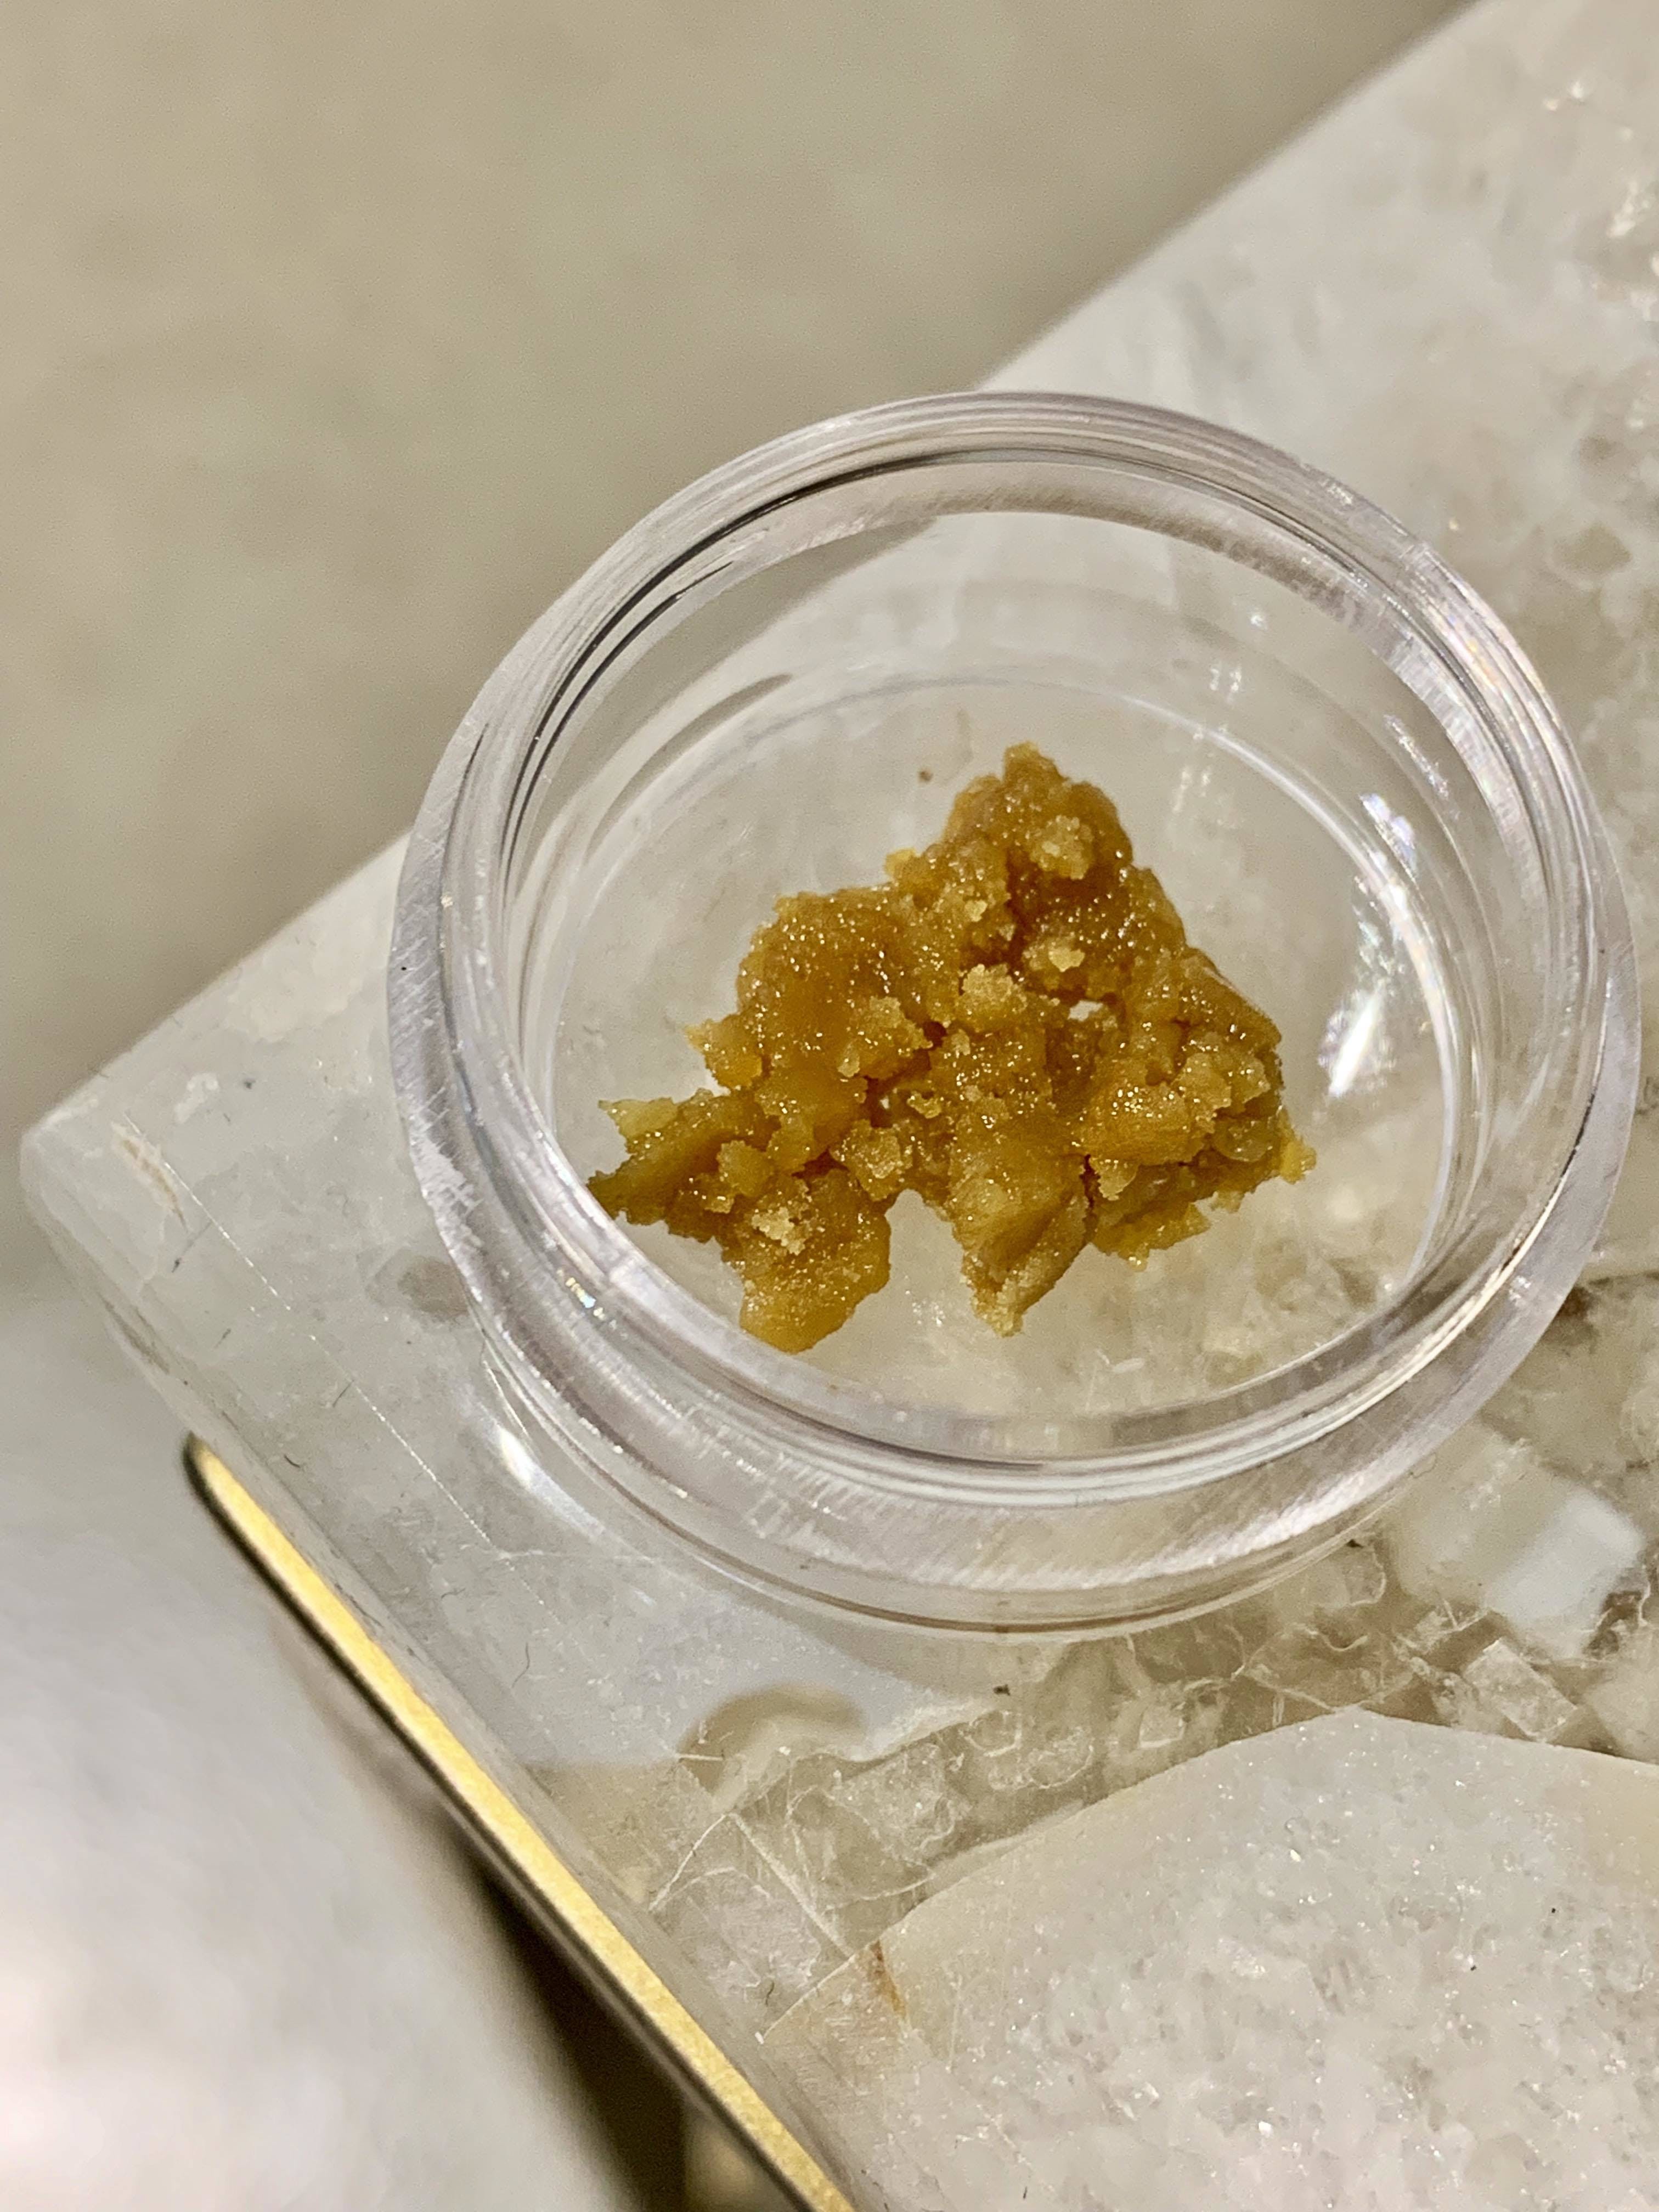 concentrate-blue-dream-wax-clarity-thc-63-2-25